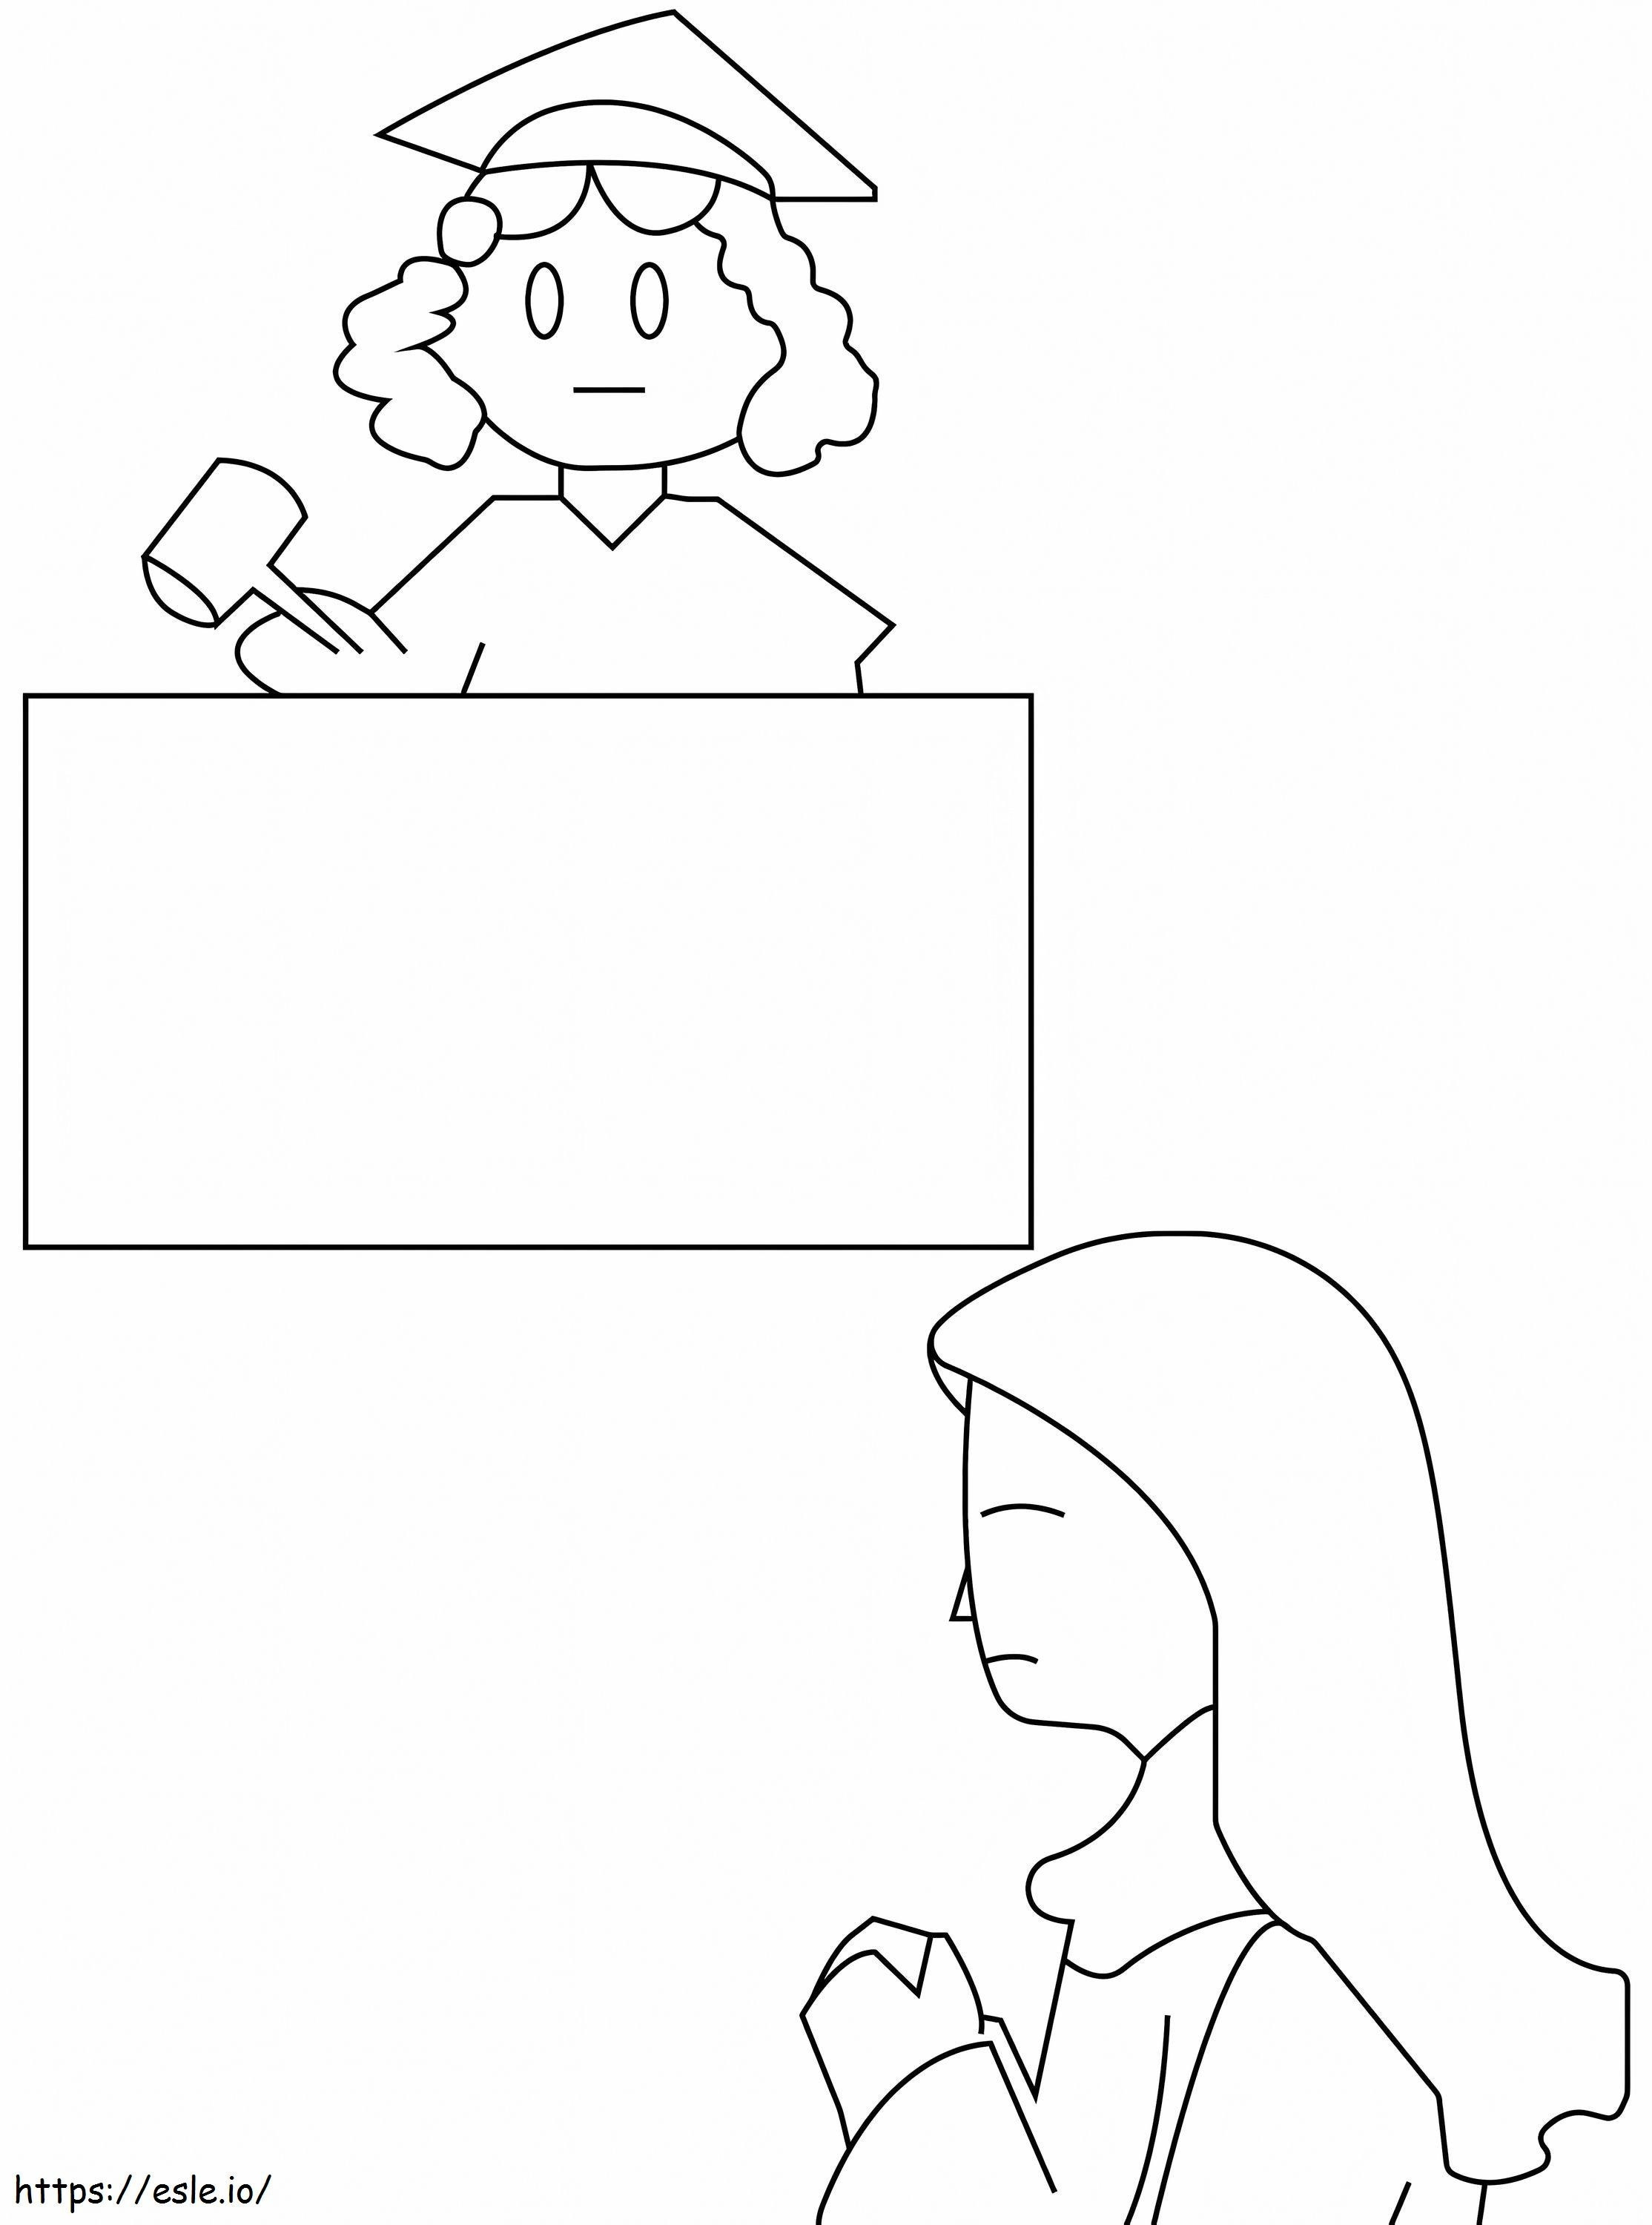 Judge And Accused coloring page